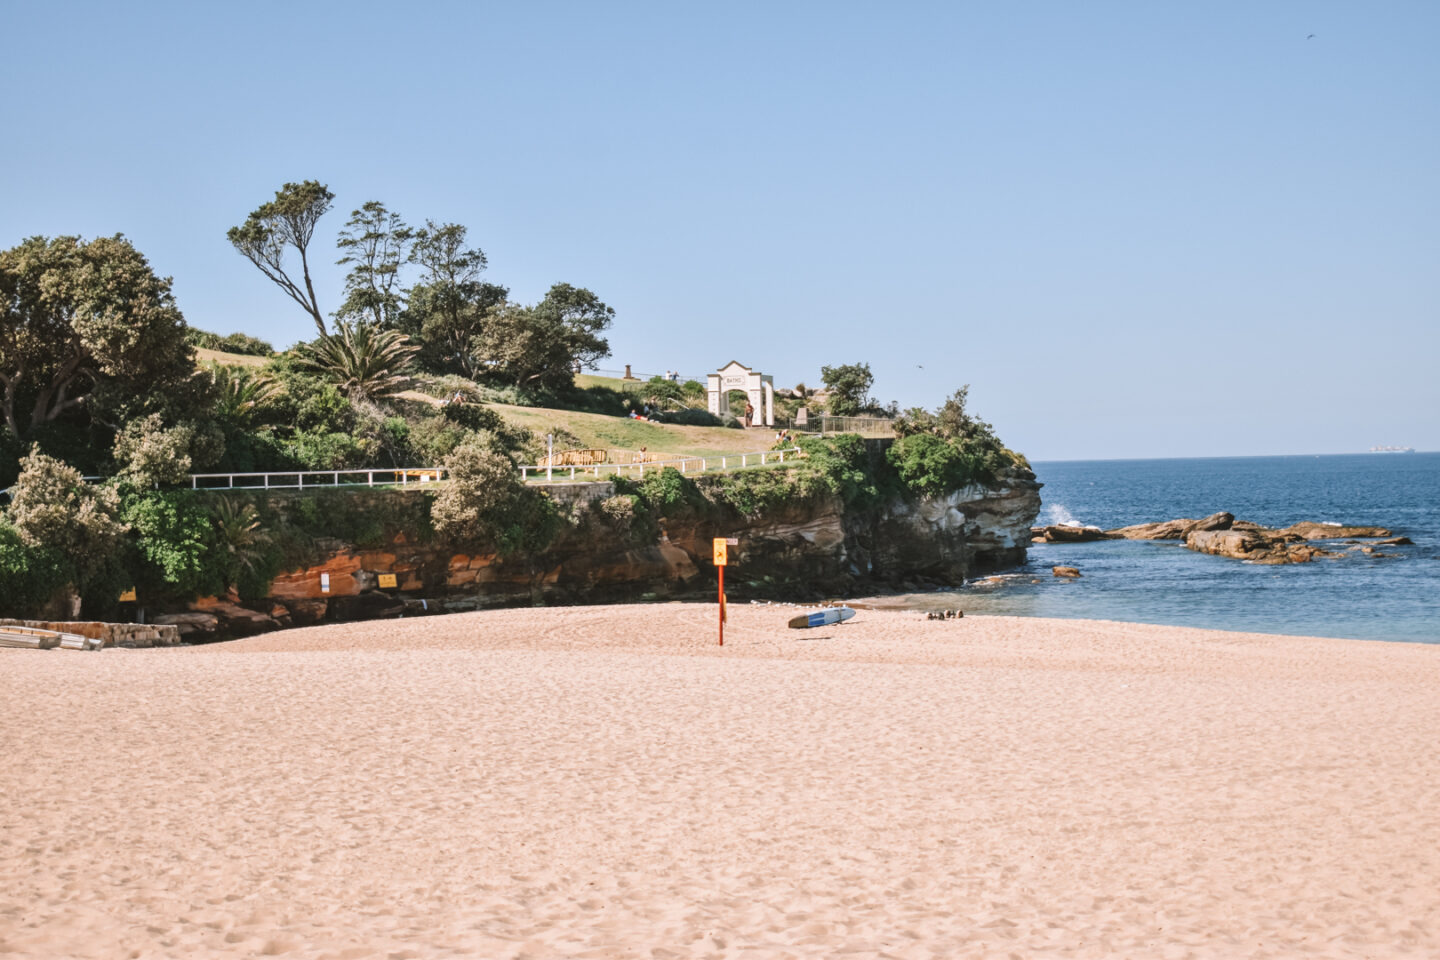 The untouched white sand of Coogee beach